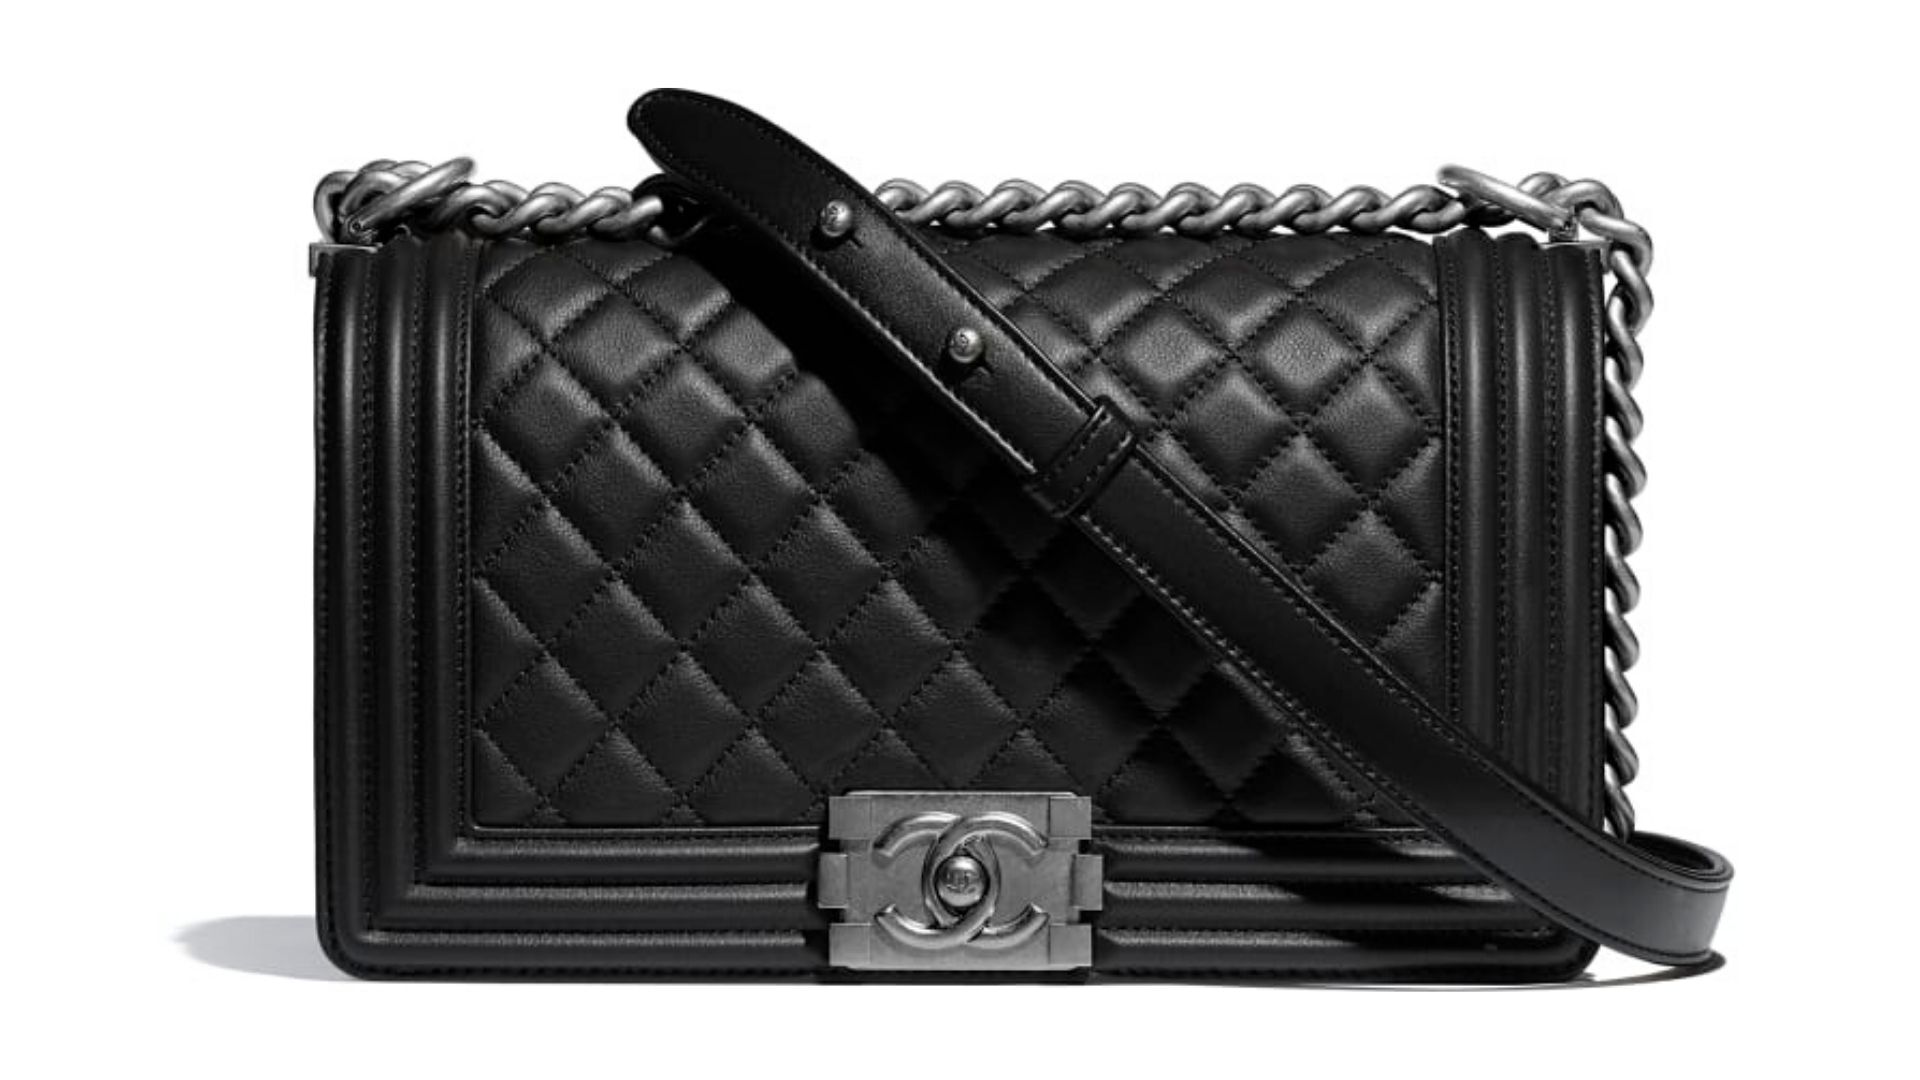 What is Chanel's Most Iconic Handbag?